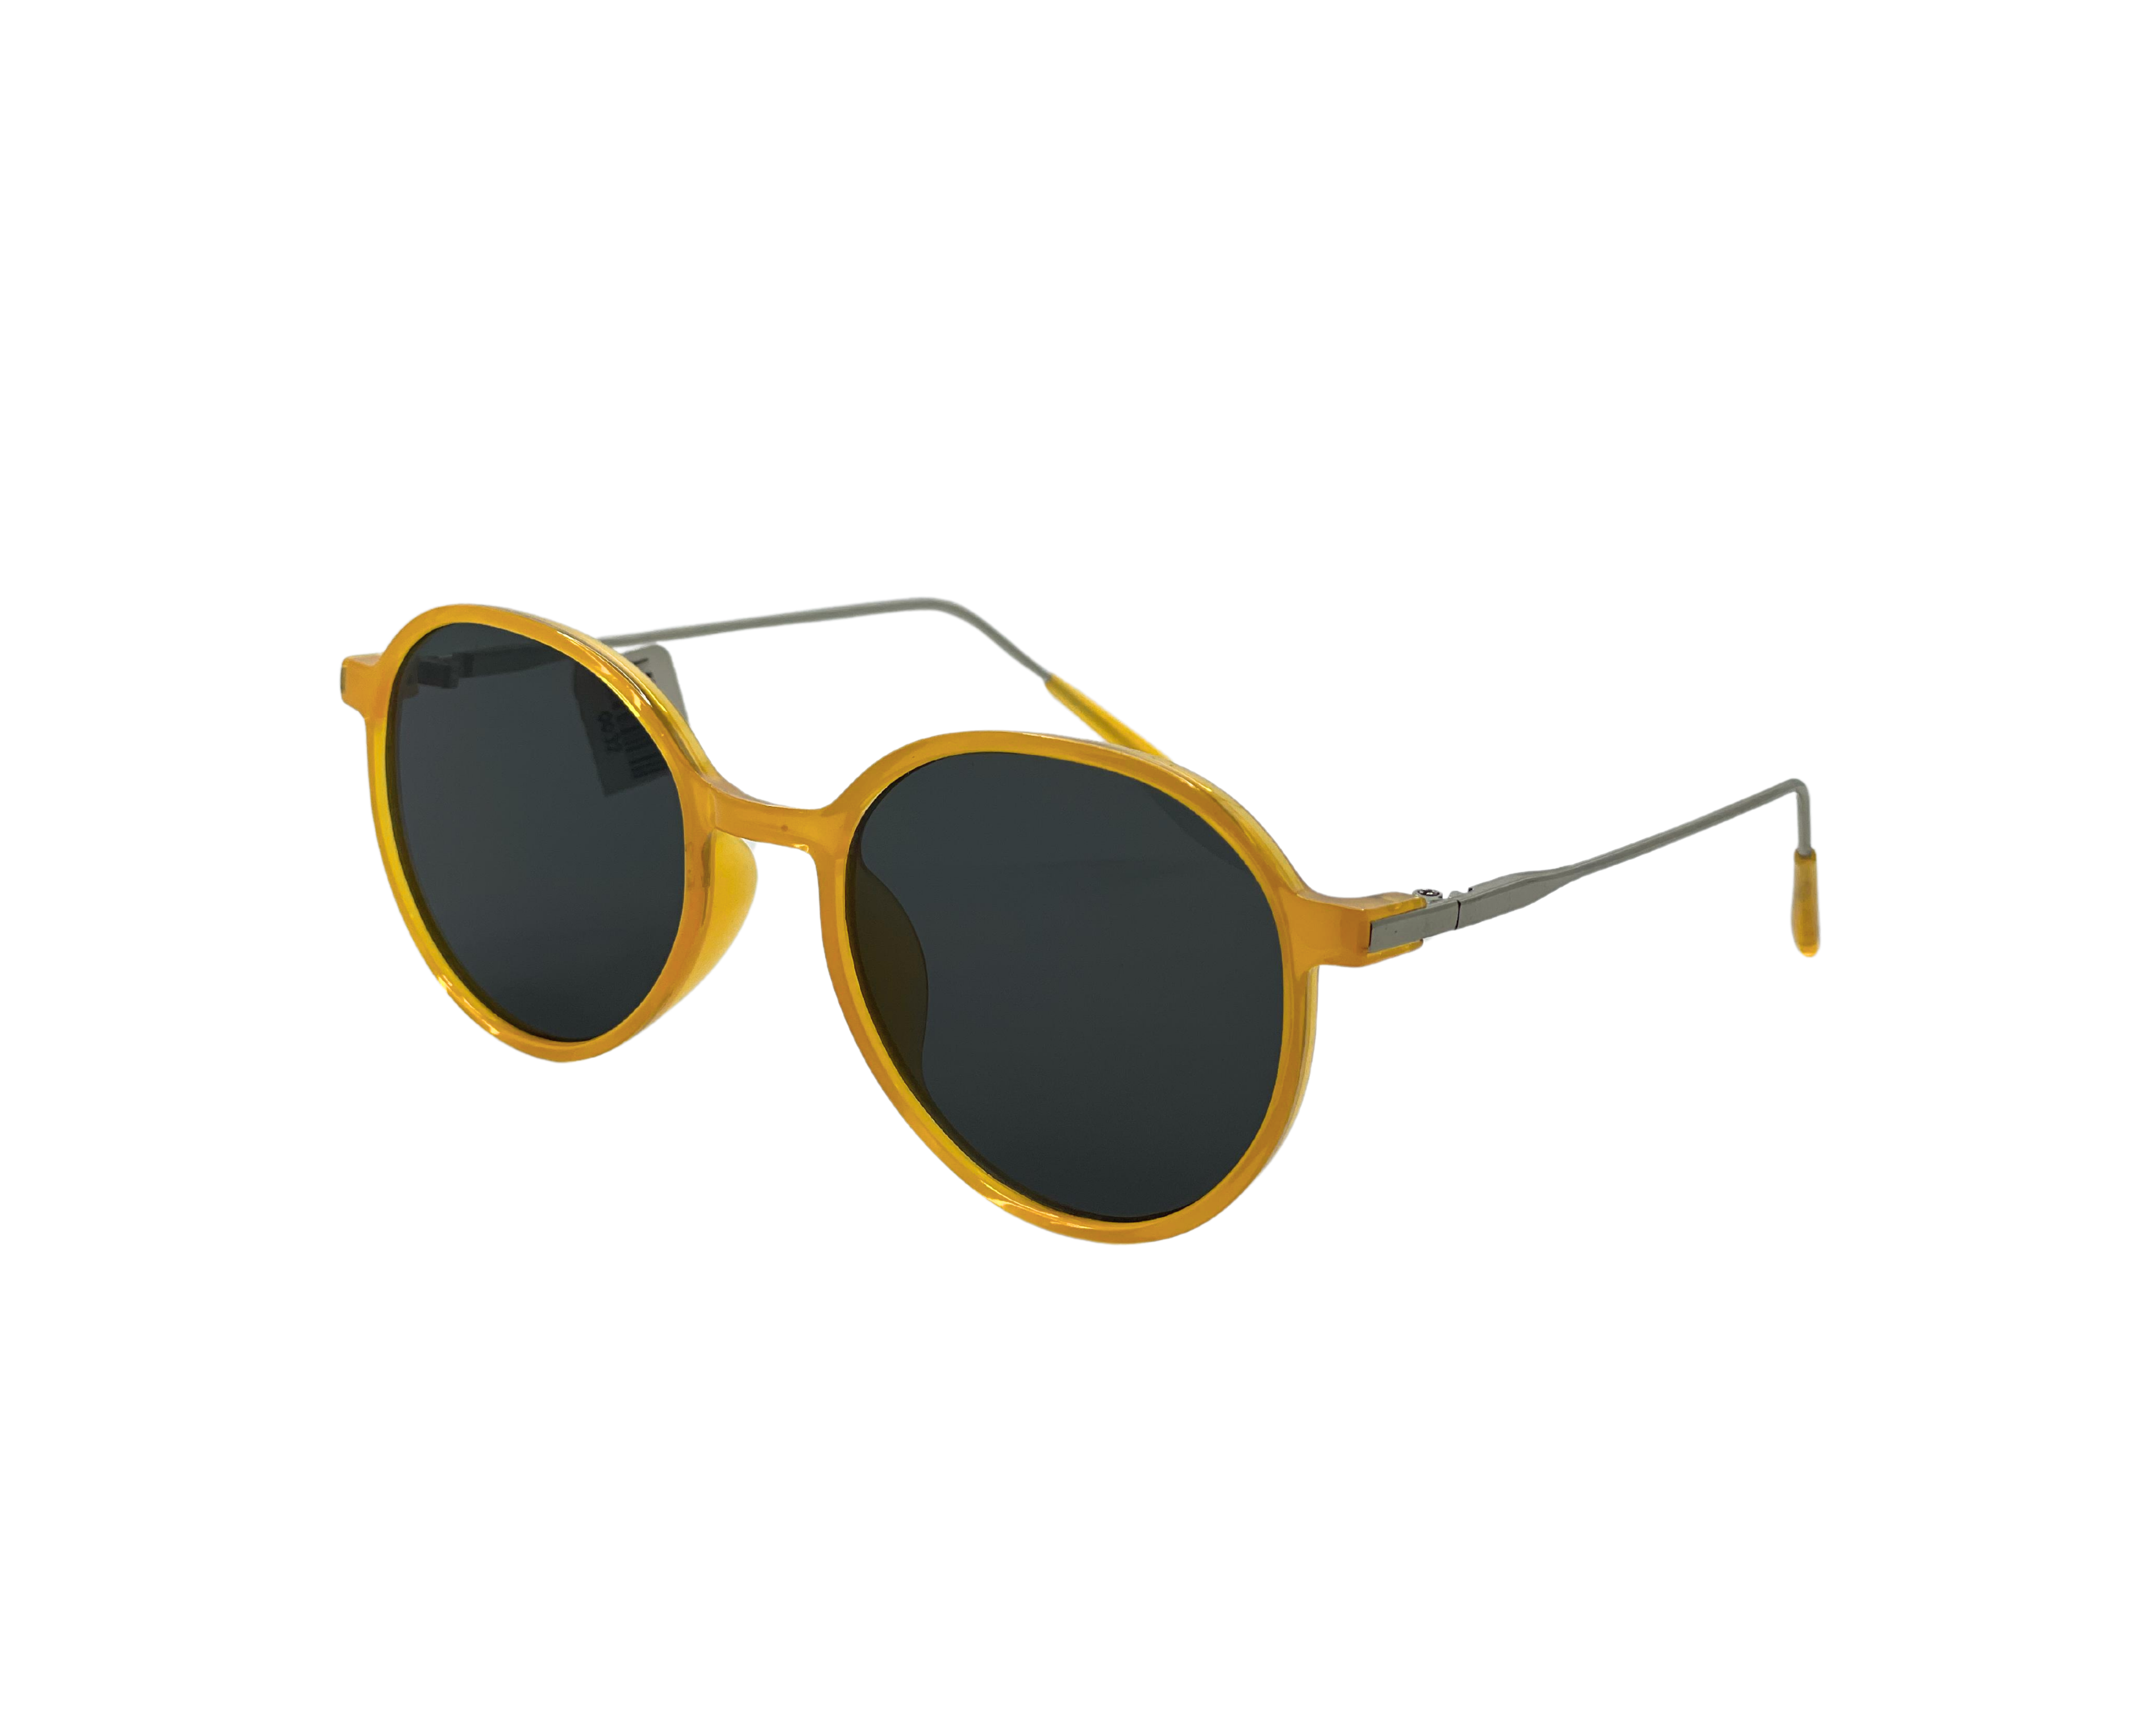 NS Deluxe - 9278 - Yellow - Sunglasses